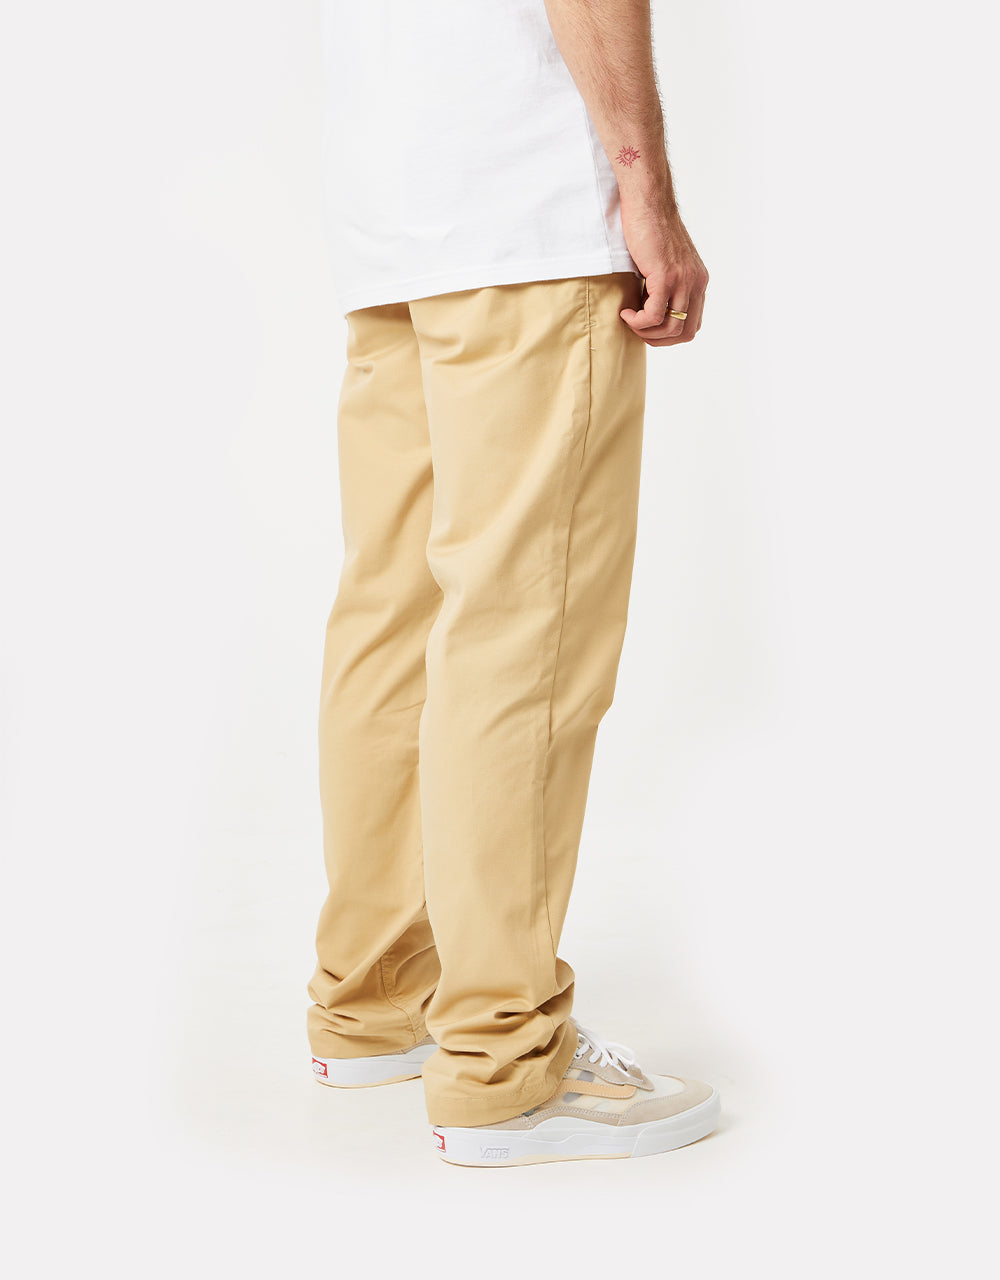 Vans Authentic Relaxed Chino Pant - Taos Taupe